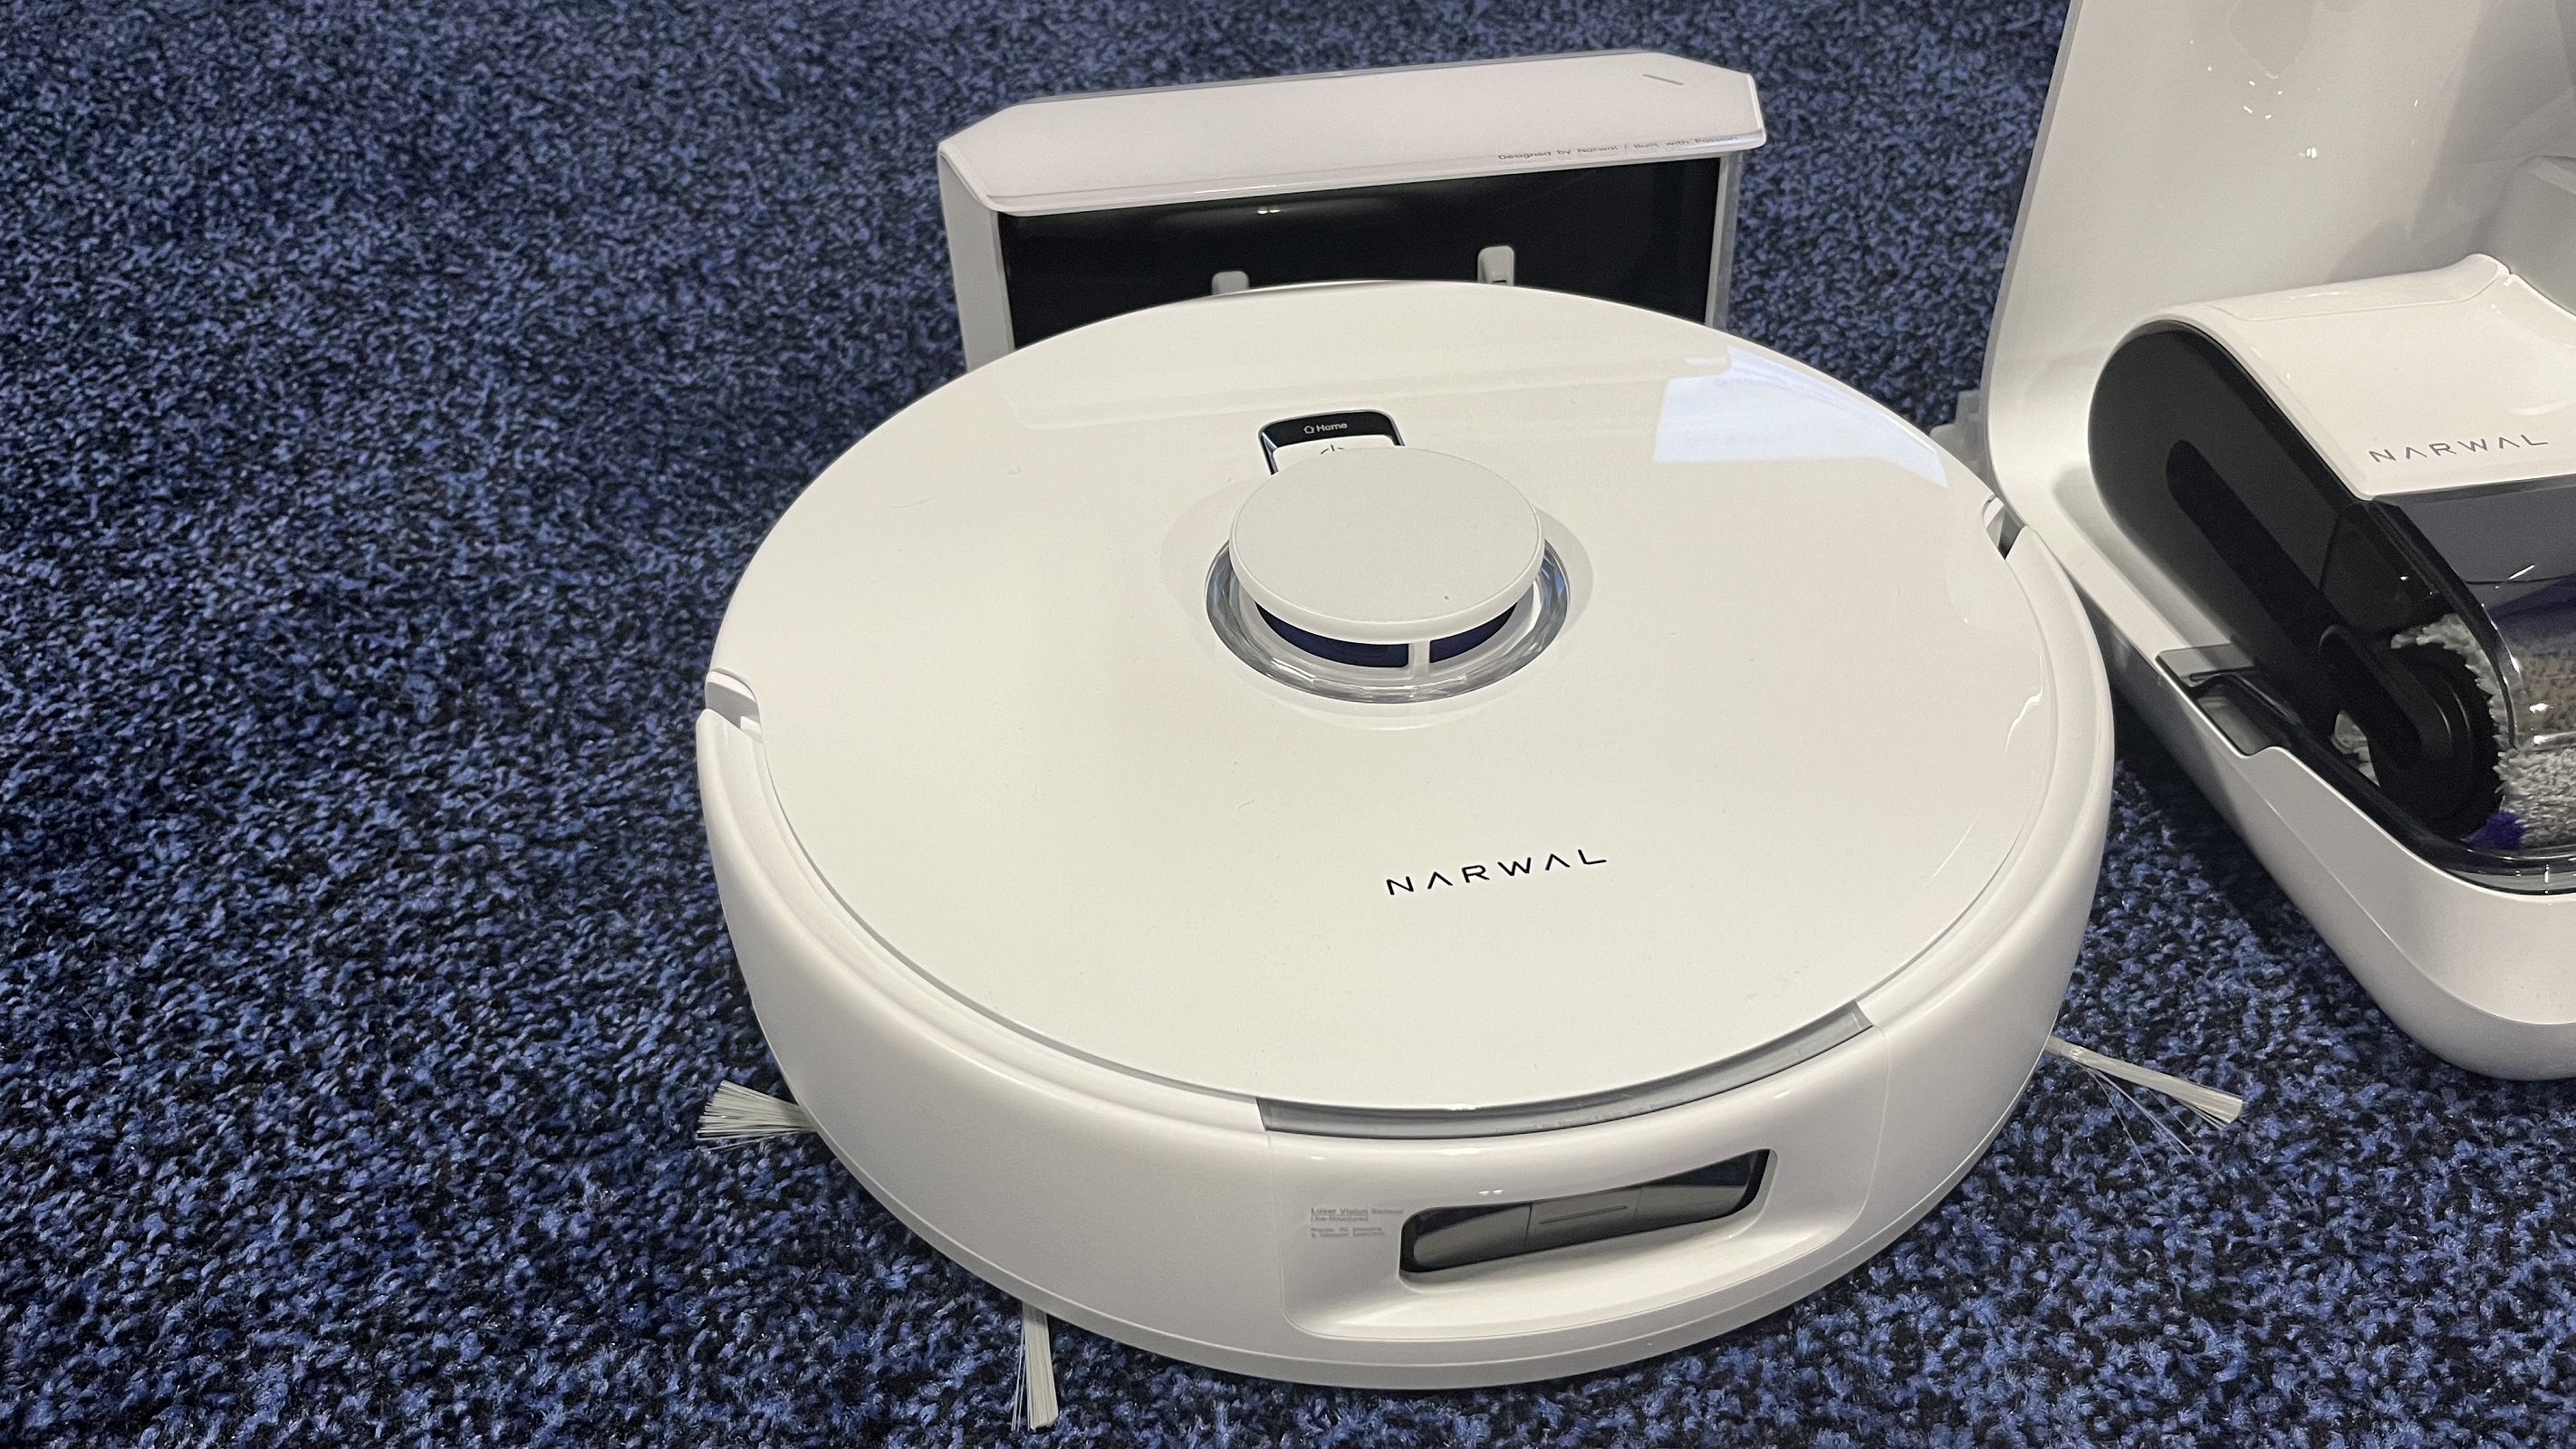 REVIEW: Narwal Robot Mop - At Home in the Future